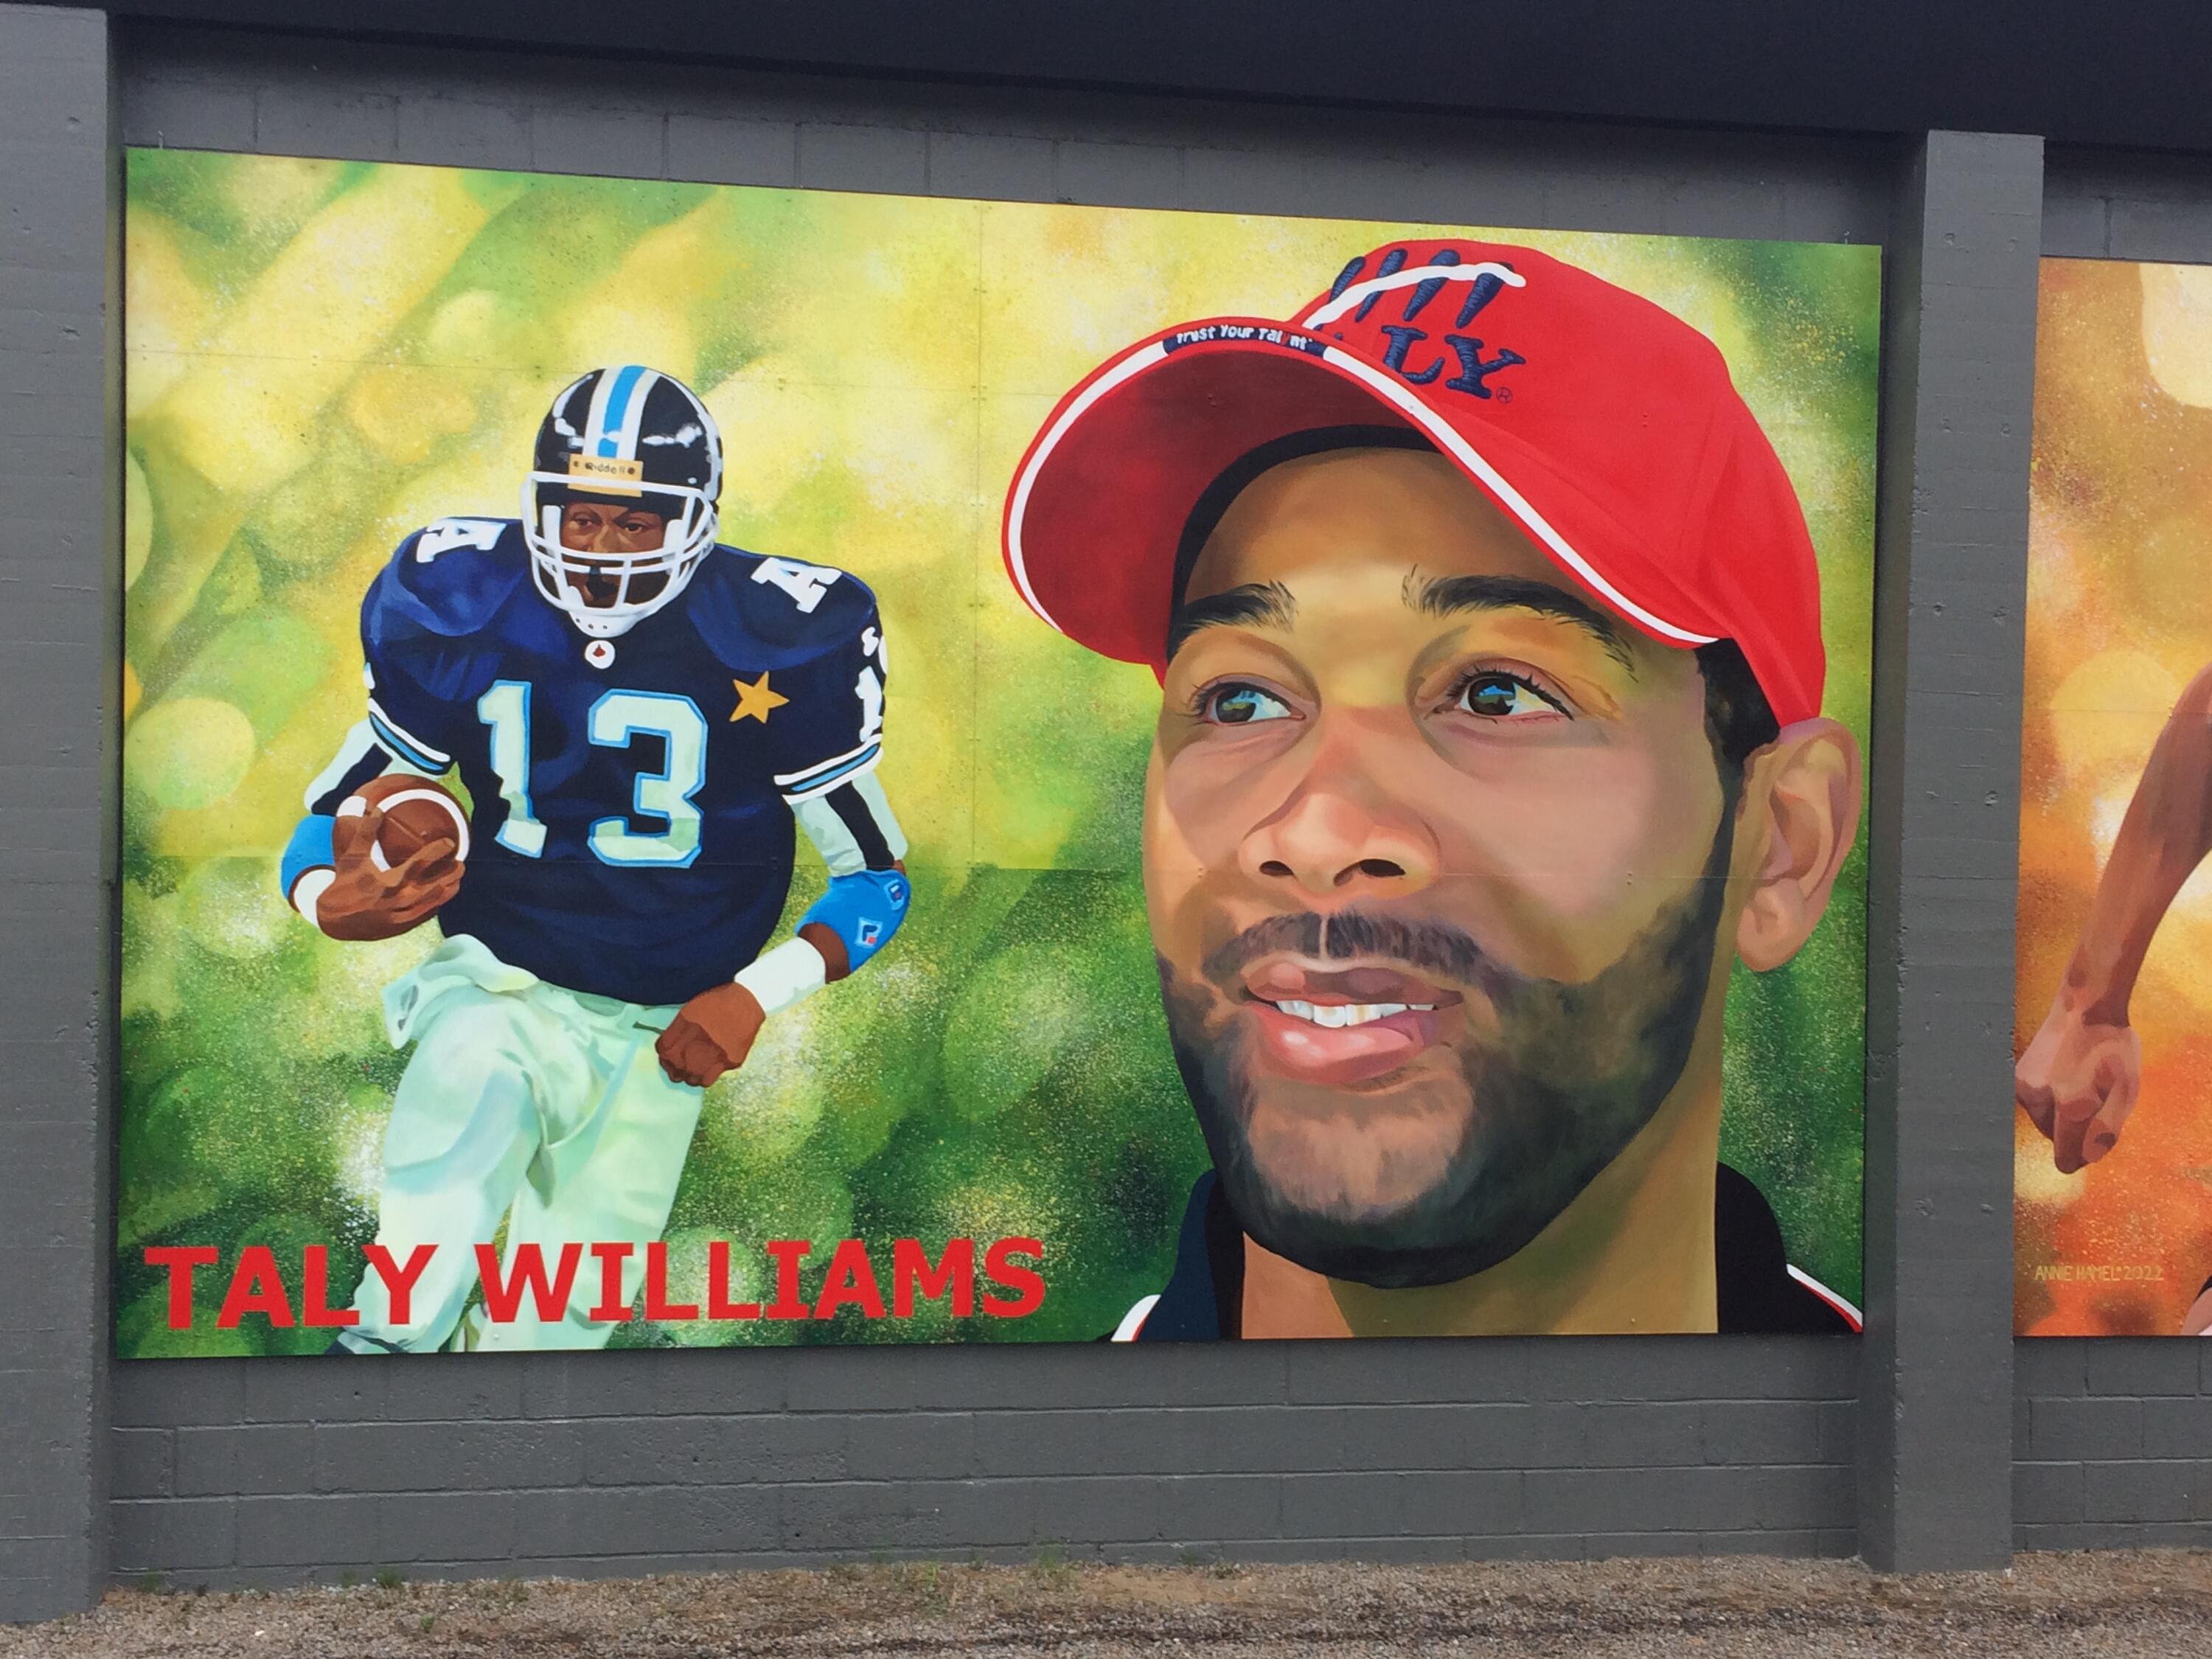 A mural of Taly Williams was recently unveiled on an arena wall in his hometown of Haliburton, Ontario.